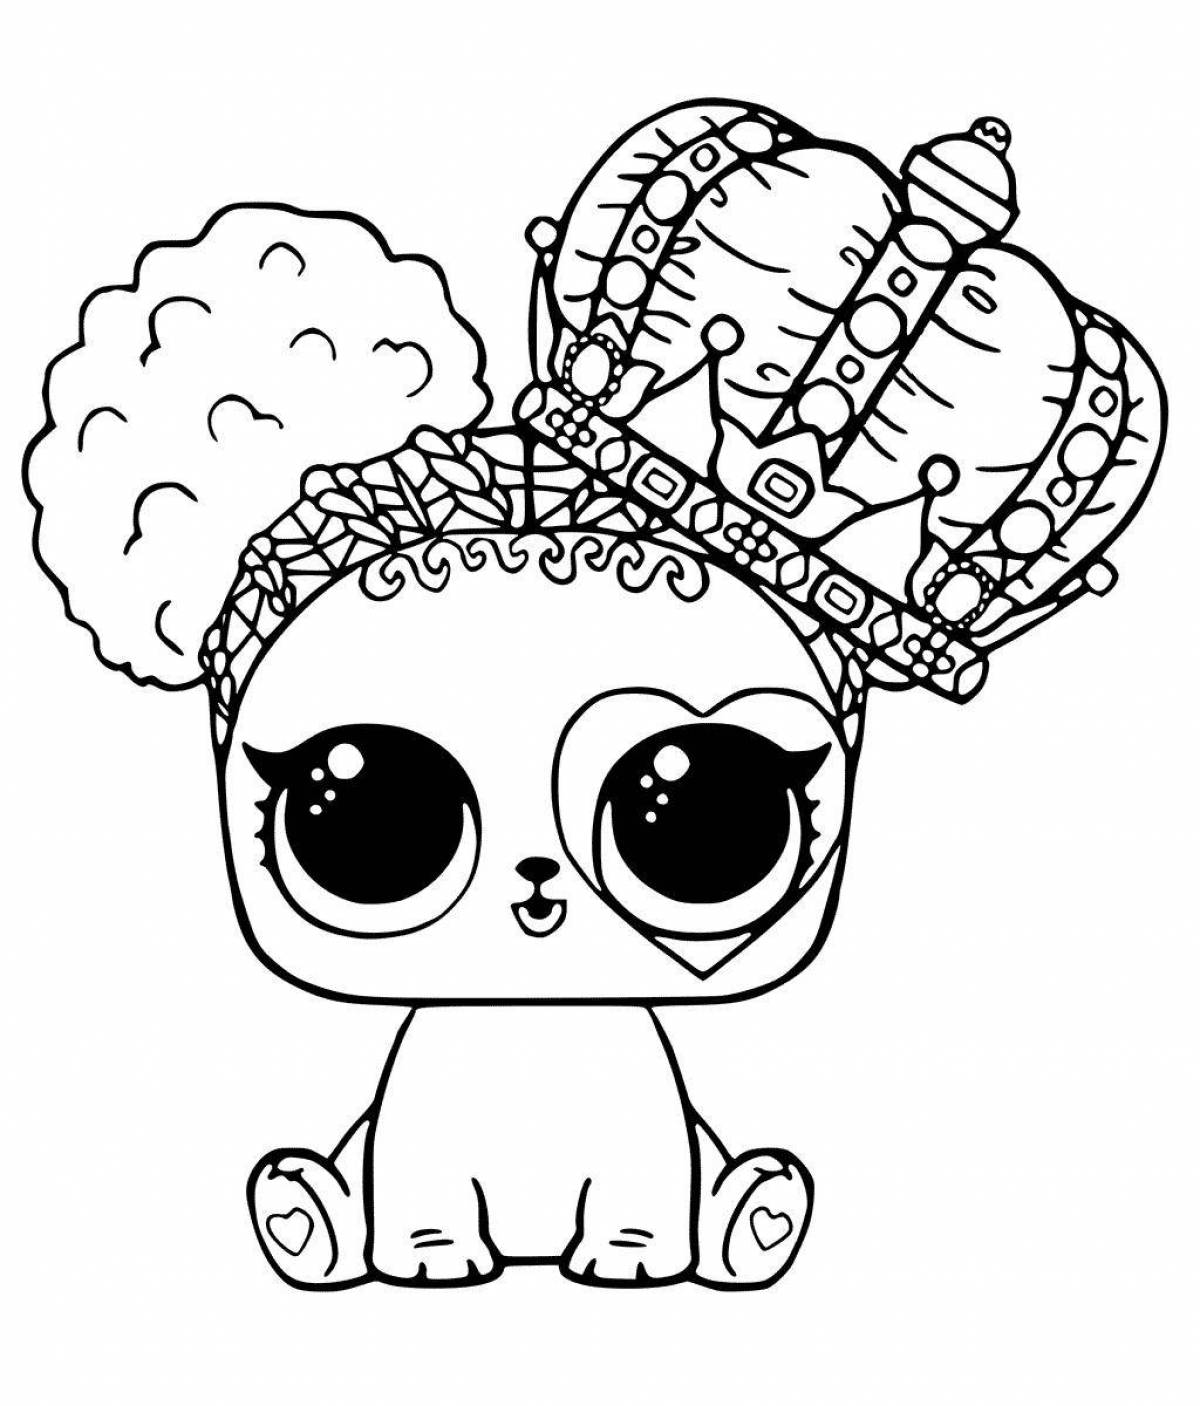 Adorable lol doll coloring page